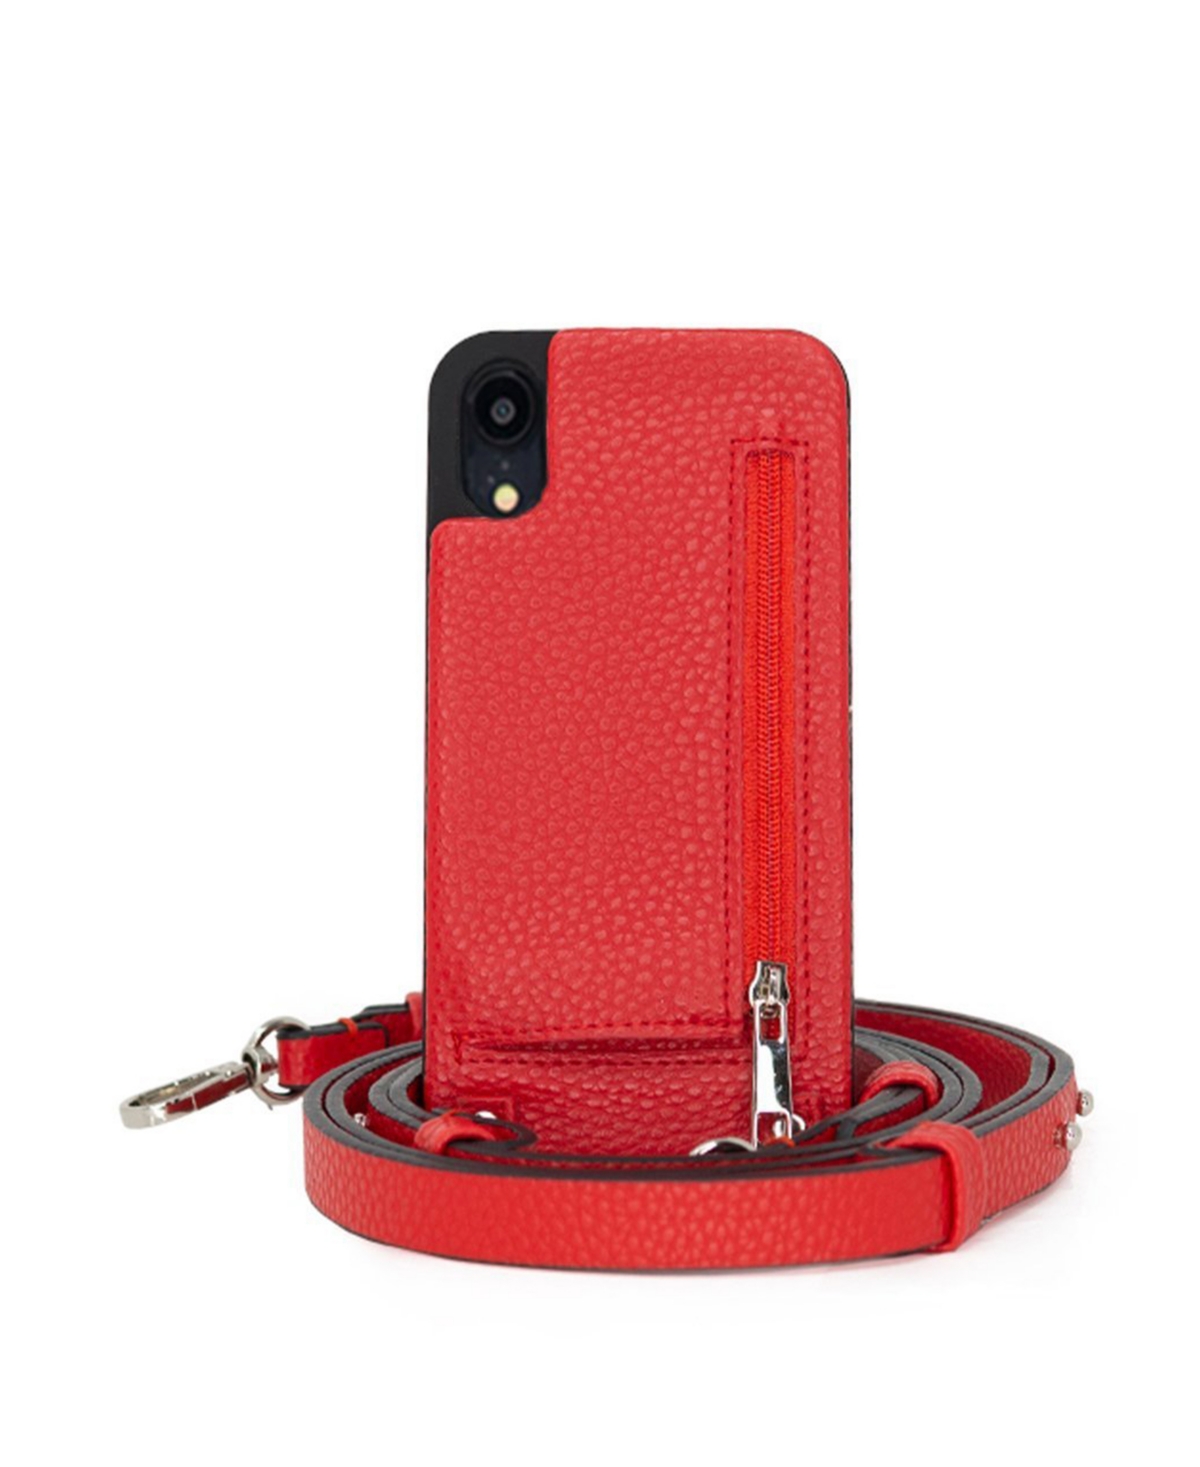 Hera Cases Crossbody Xr IPhone Case with Strap Wallet